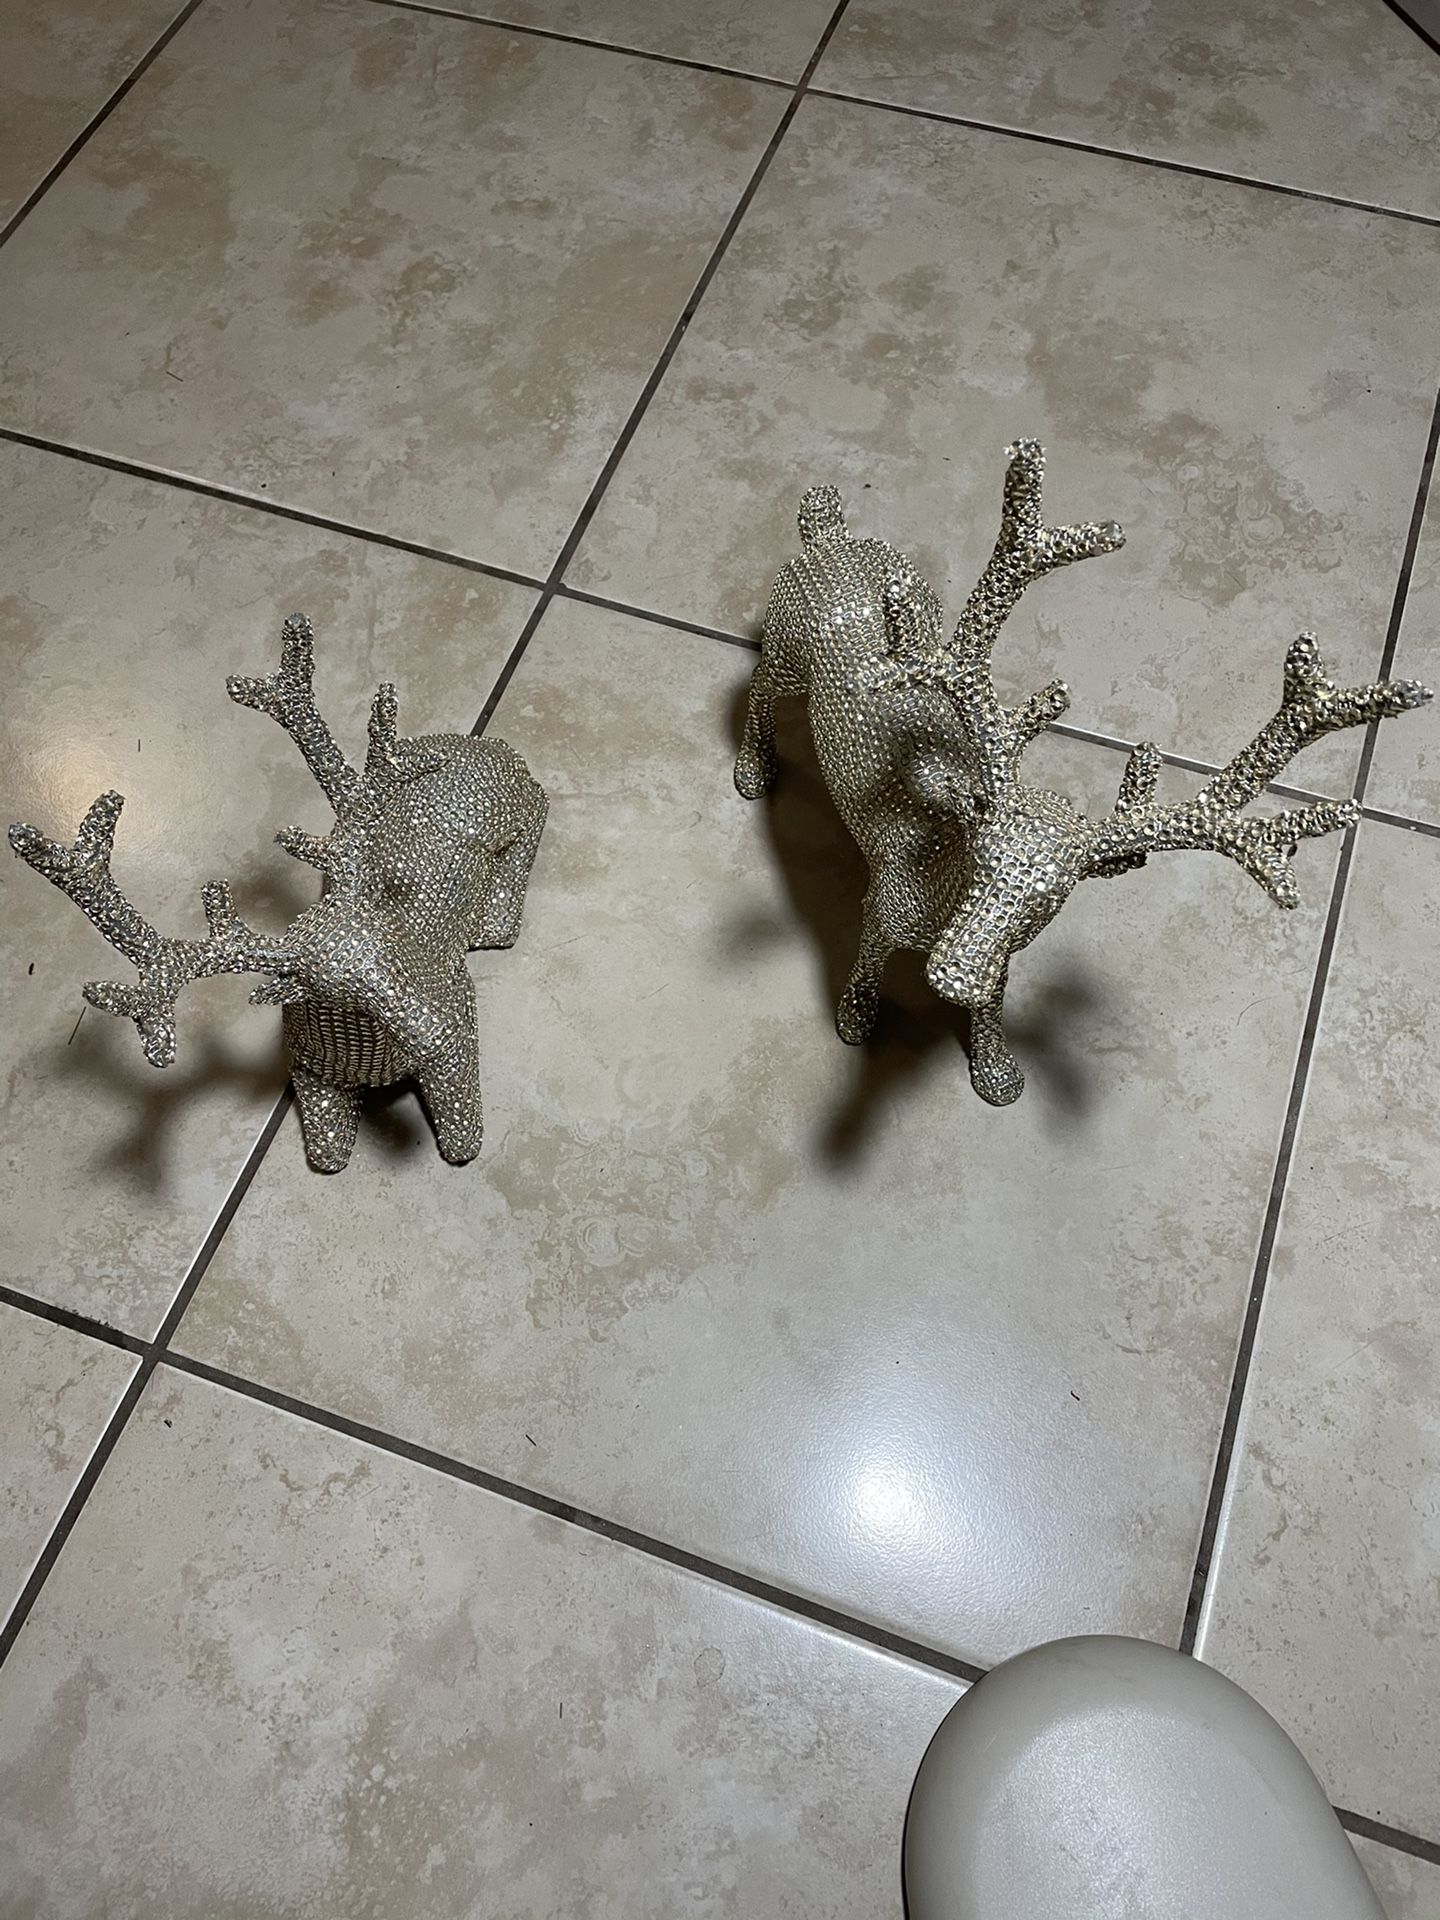 2 Decoration Deer .Both For $10 Firm And Price